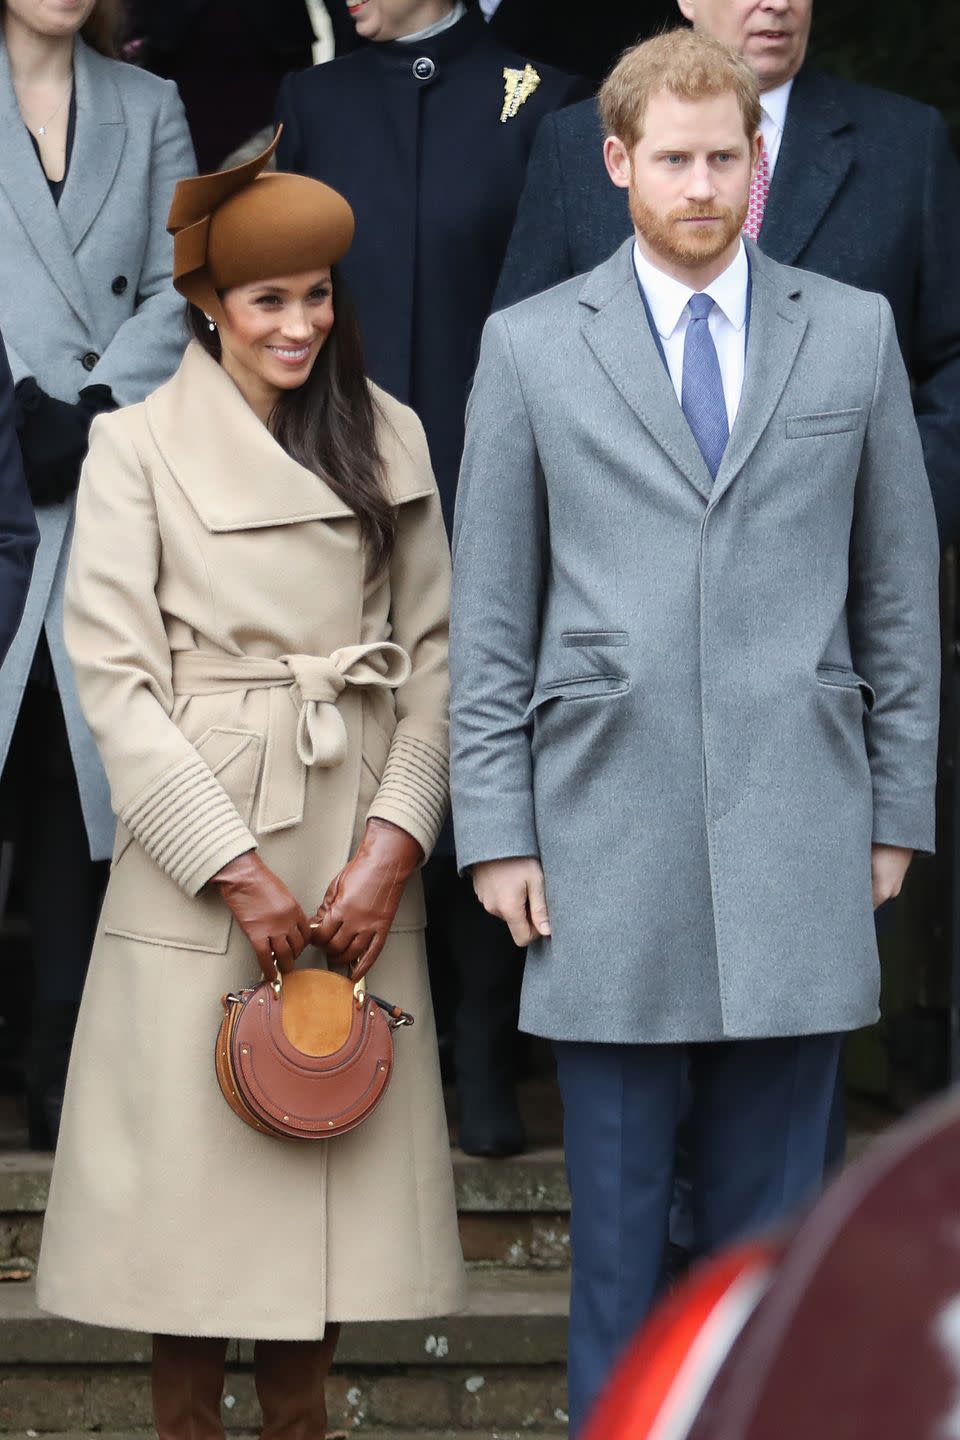 <p>For her first Royal Christmas, the soon-to-be Duchess of Sussex picked a camel tone wide collar wrap coat by Sentaler for her warm neutral holiday look.</p>